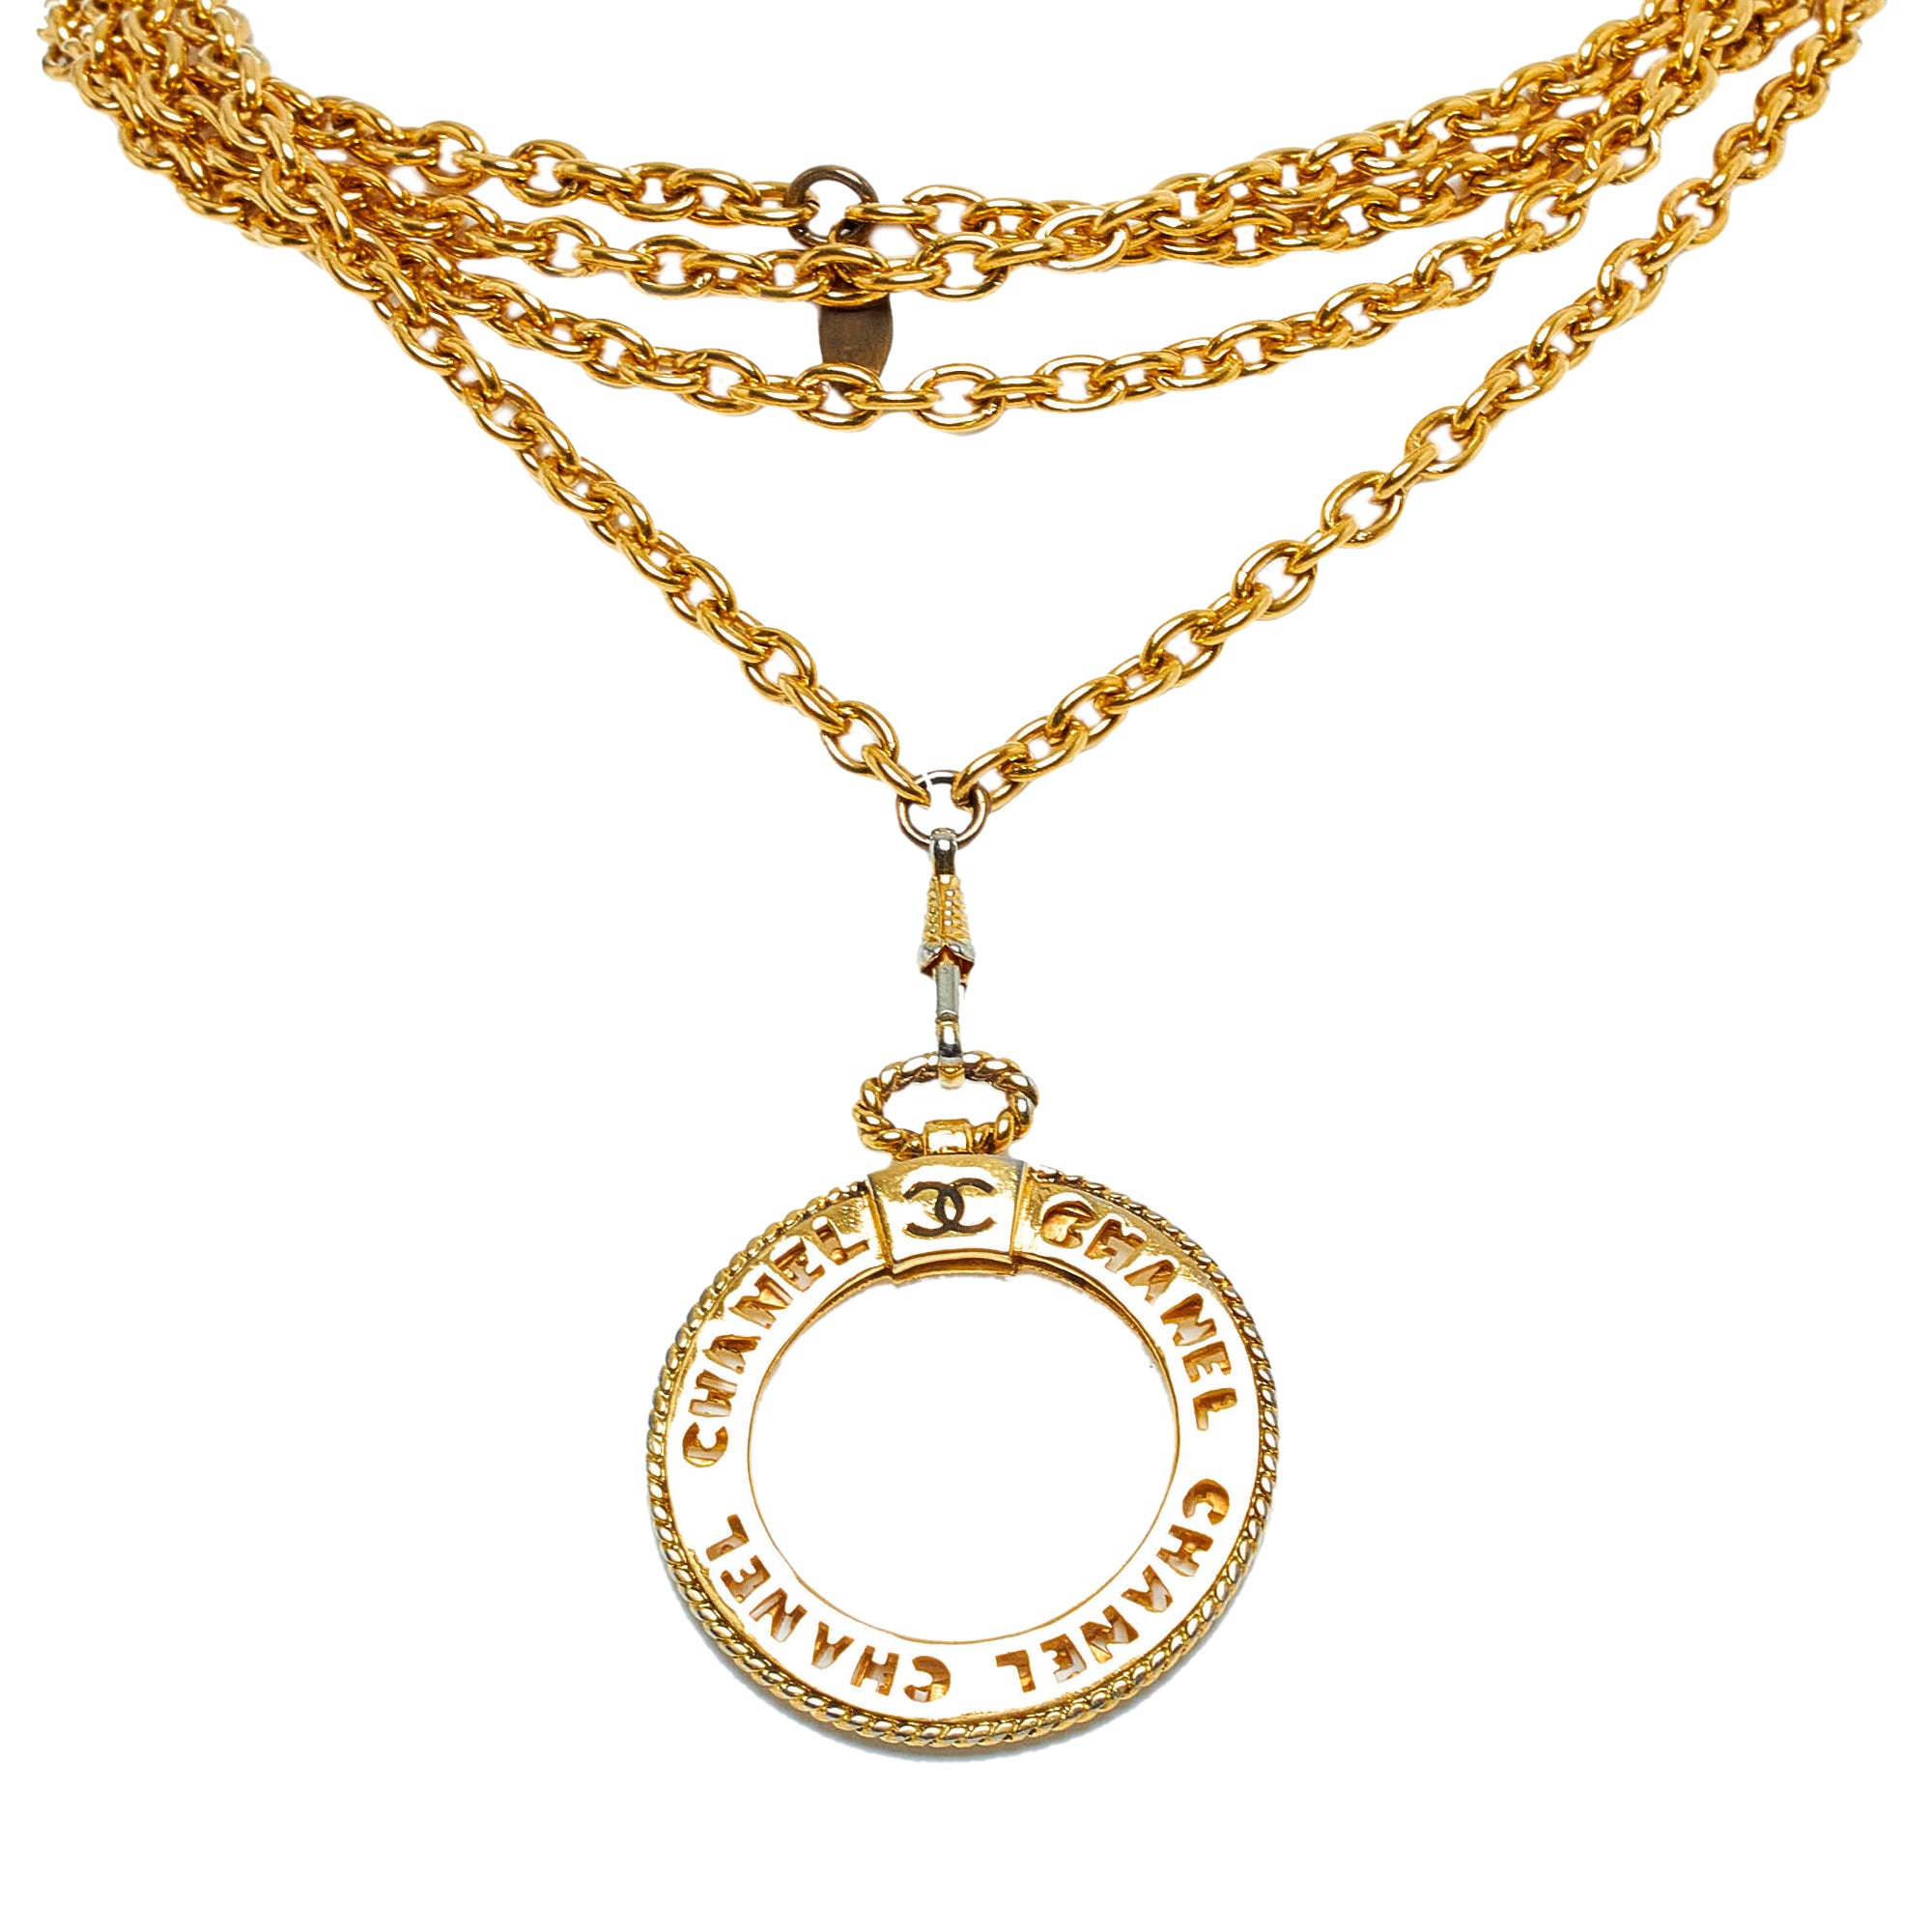 Gold Chanel Loupe Magnifying Glass Necklace – RvceShops Revival